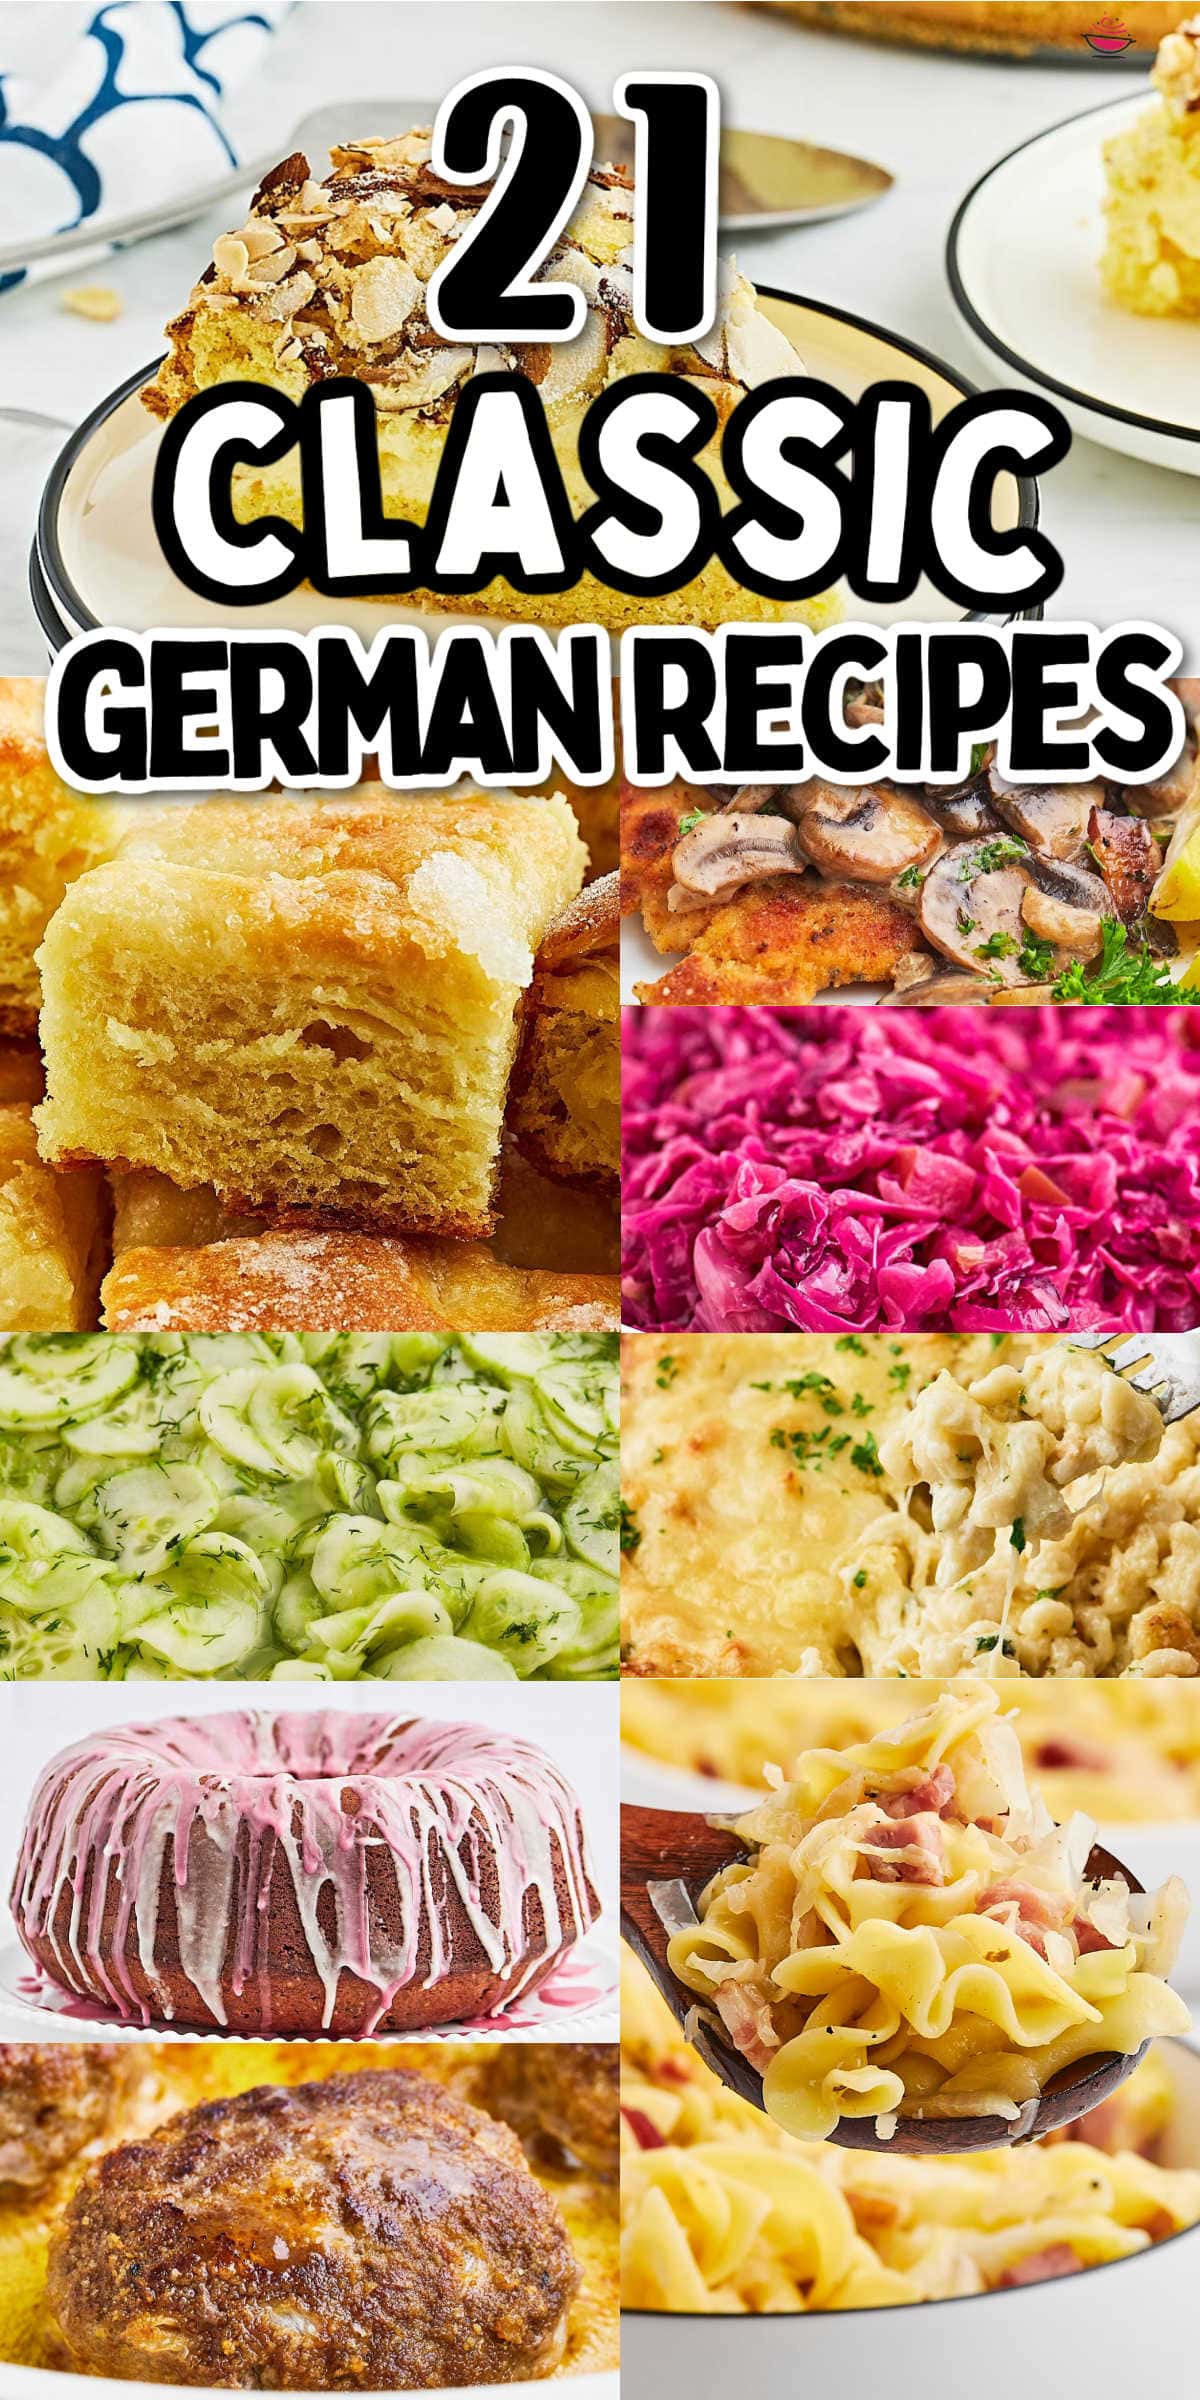 Check out some of the most popular German recipes! From soft, cozy potato dumplings and crispy, juicy Schnitzel with a mushroom gravy to a refreshing cucumber salad, there's something for everyone at the table. And let's not forget dessert—end your meal on a sweet note with a slice of heavenly German Apple Cake. #cheerfulcook #germanfood #germanrecipes #germandishes #oktoberfest #octoberfest #germany via @cheerfulcook